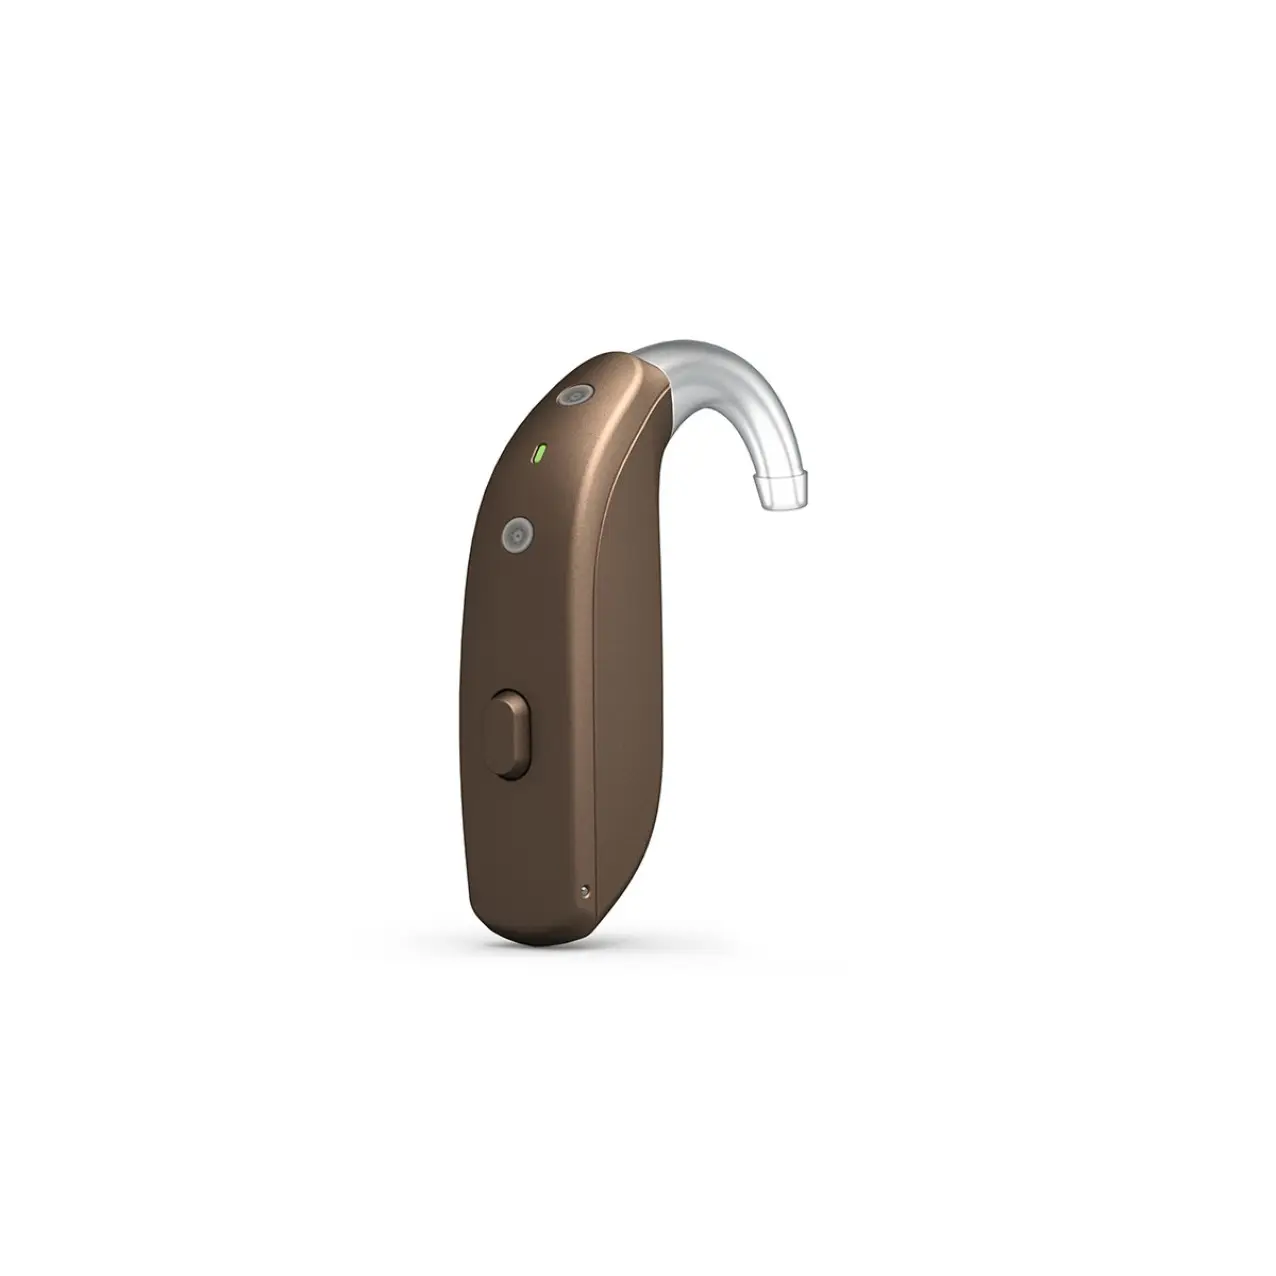 One 9 BTE 1 Hearing Aids and 1 Desktop Charger One Rechargeable 77 BTE Hearing Aids Machine